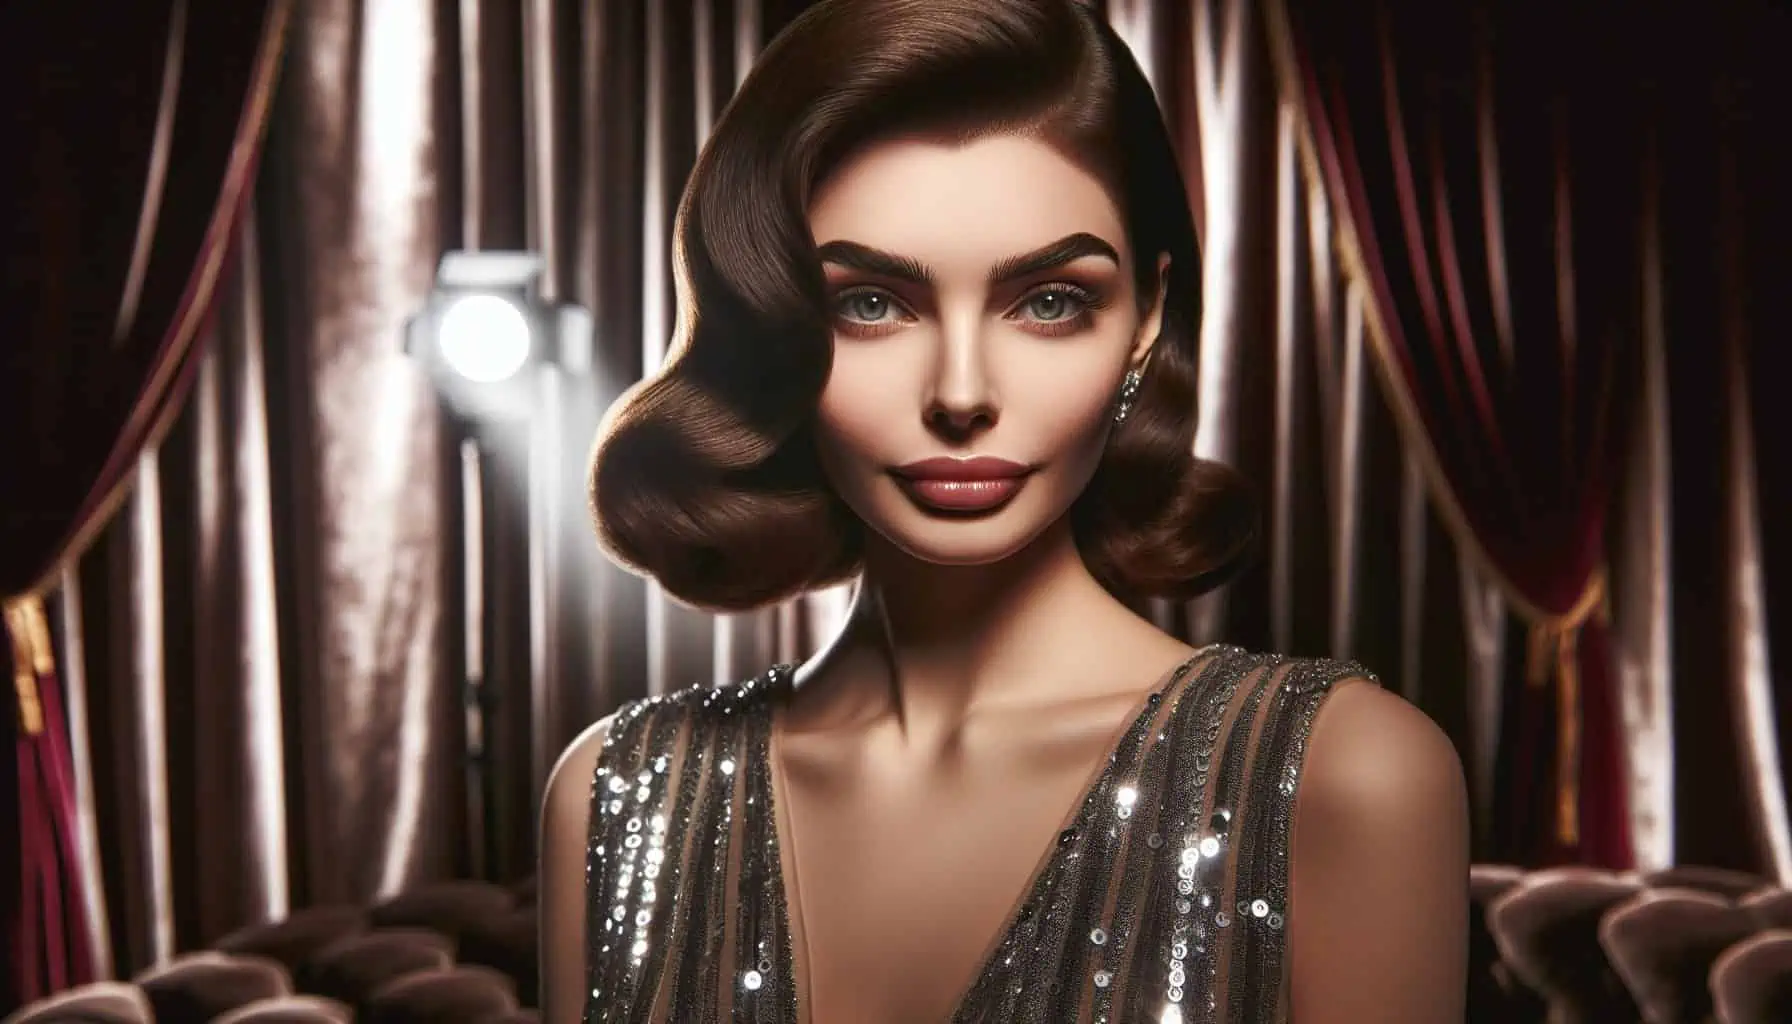 Elegance of Eyebrows: Beauty Trend A Timeless Old Hollywood